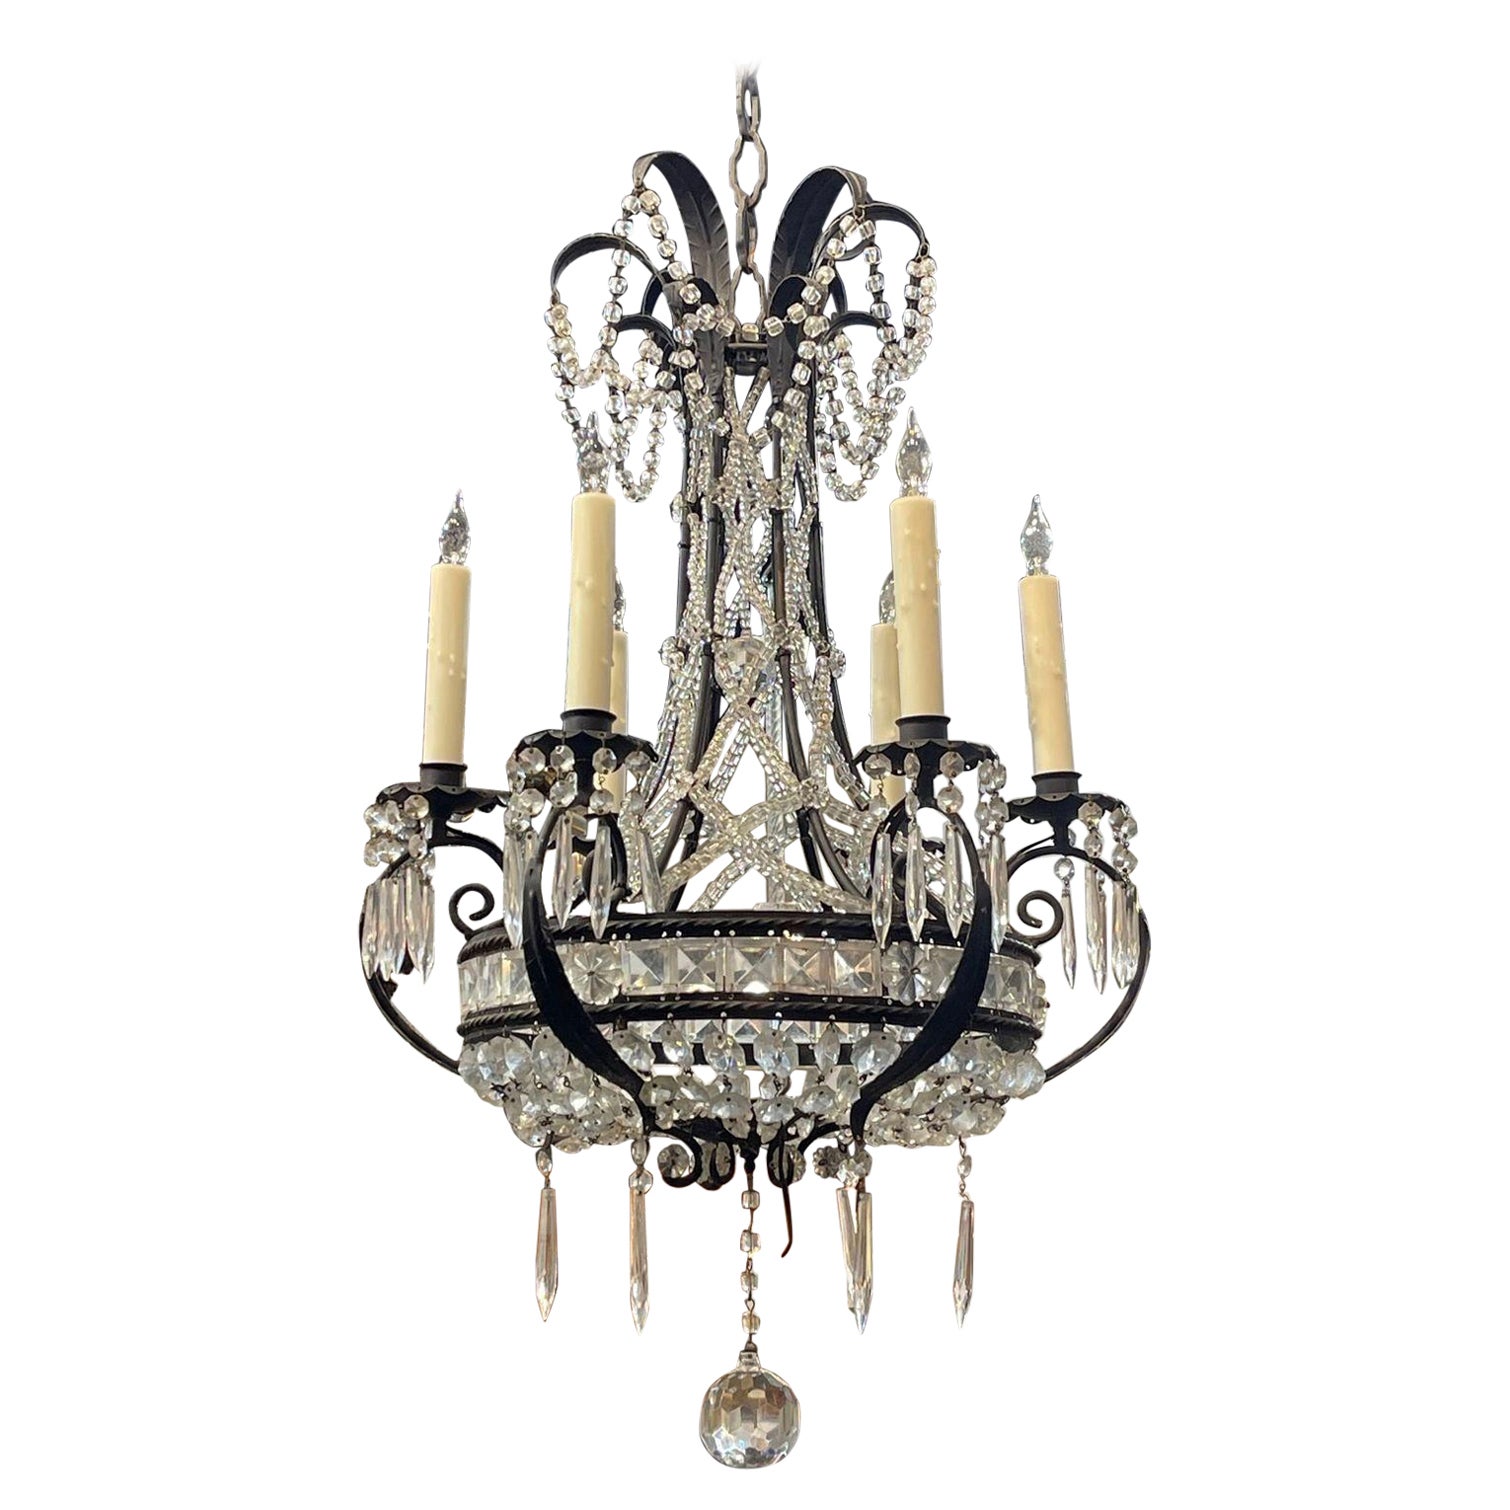 Vintage French Bagues Style Iron and Crystal 6 Light Chandelier